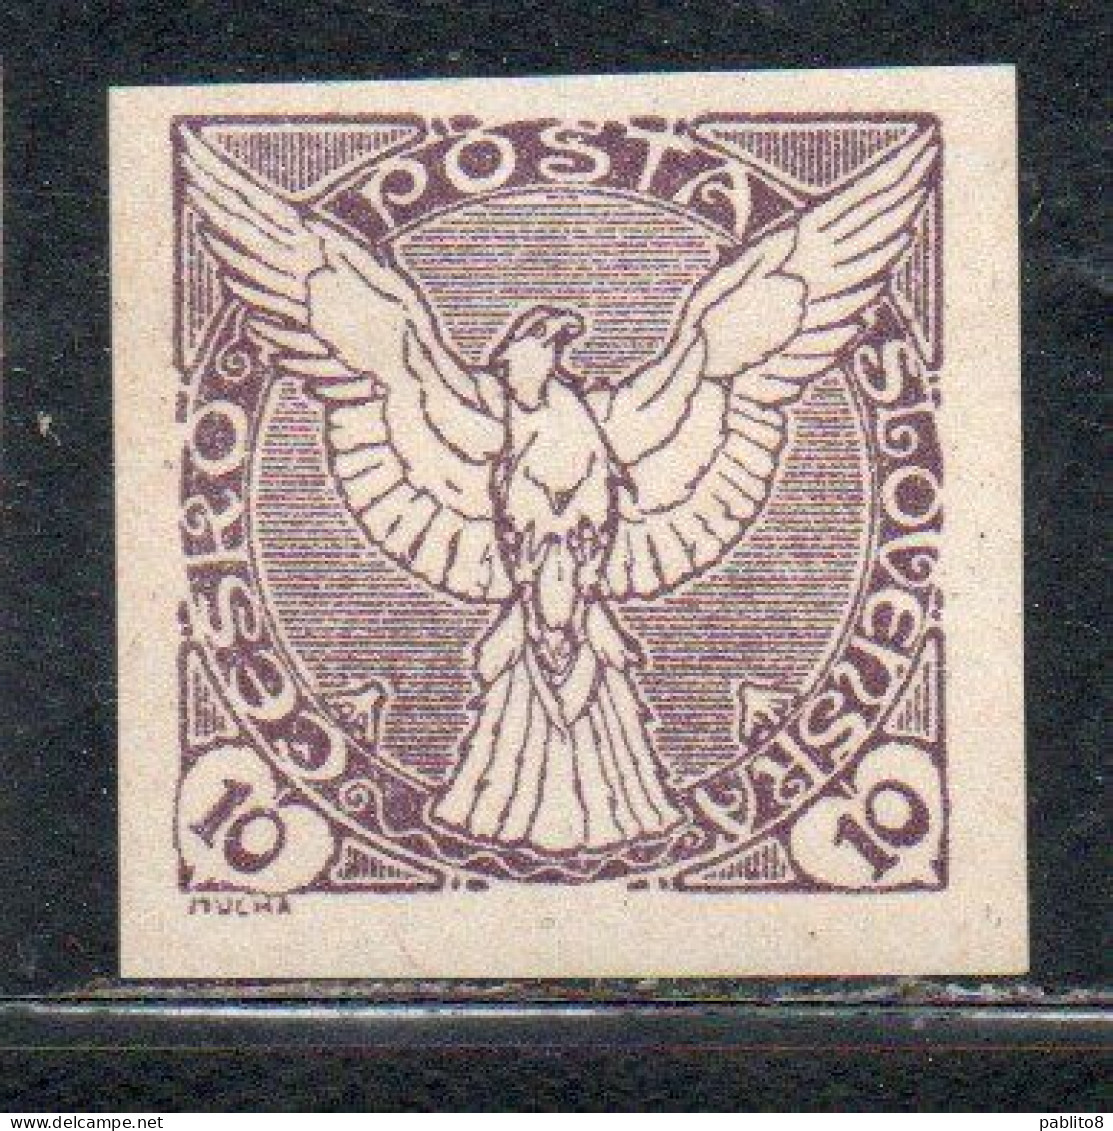 CZECHOSLOVAKIA CESKA CECOSLOVACCHIA 1918 1920 IMPERF. NEWSPAPER STAMPS WINDHOVER 10h MH - Timbres Pour Journaux